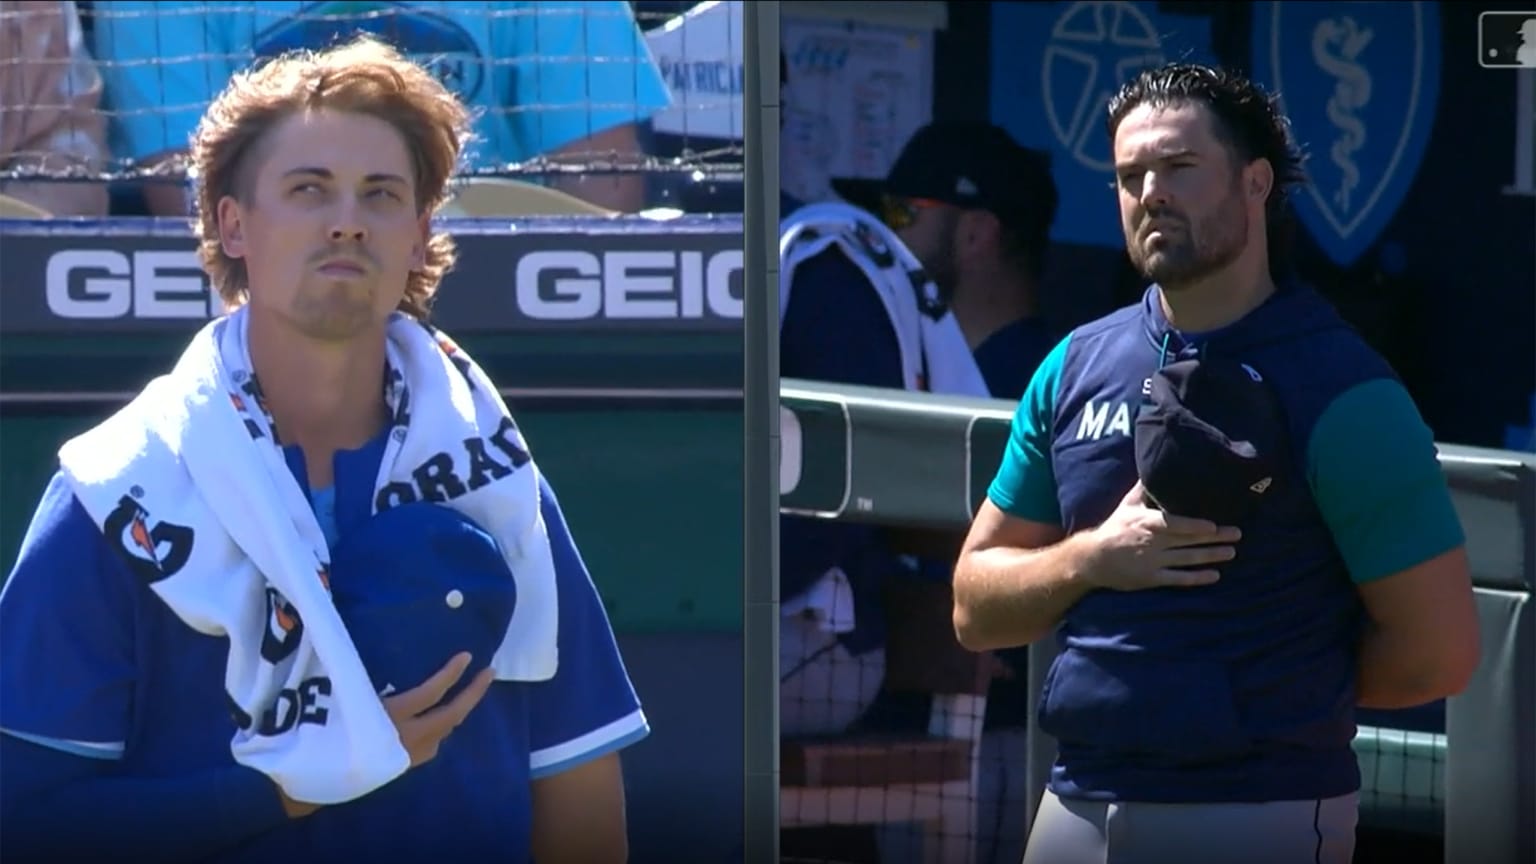 Luke Weaver and Robbie Ray stand with their caps over their hearts during the national anthem